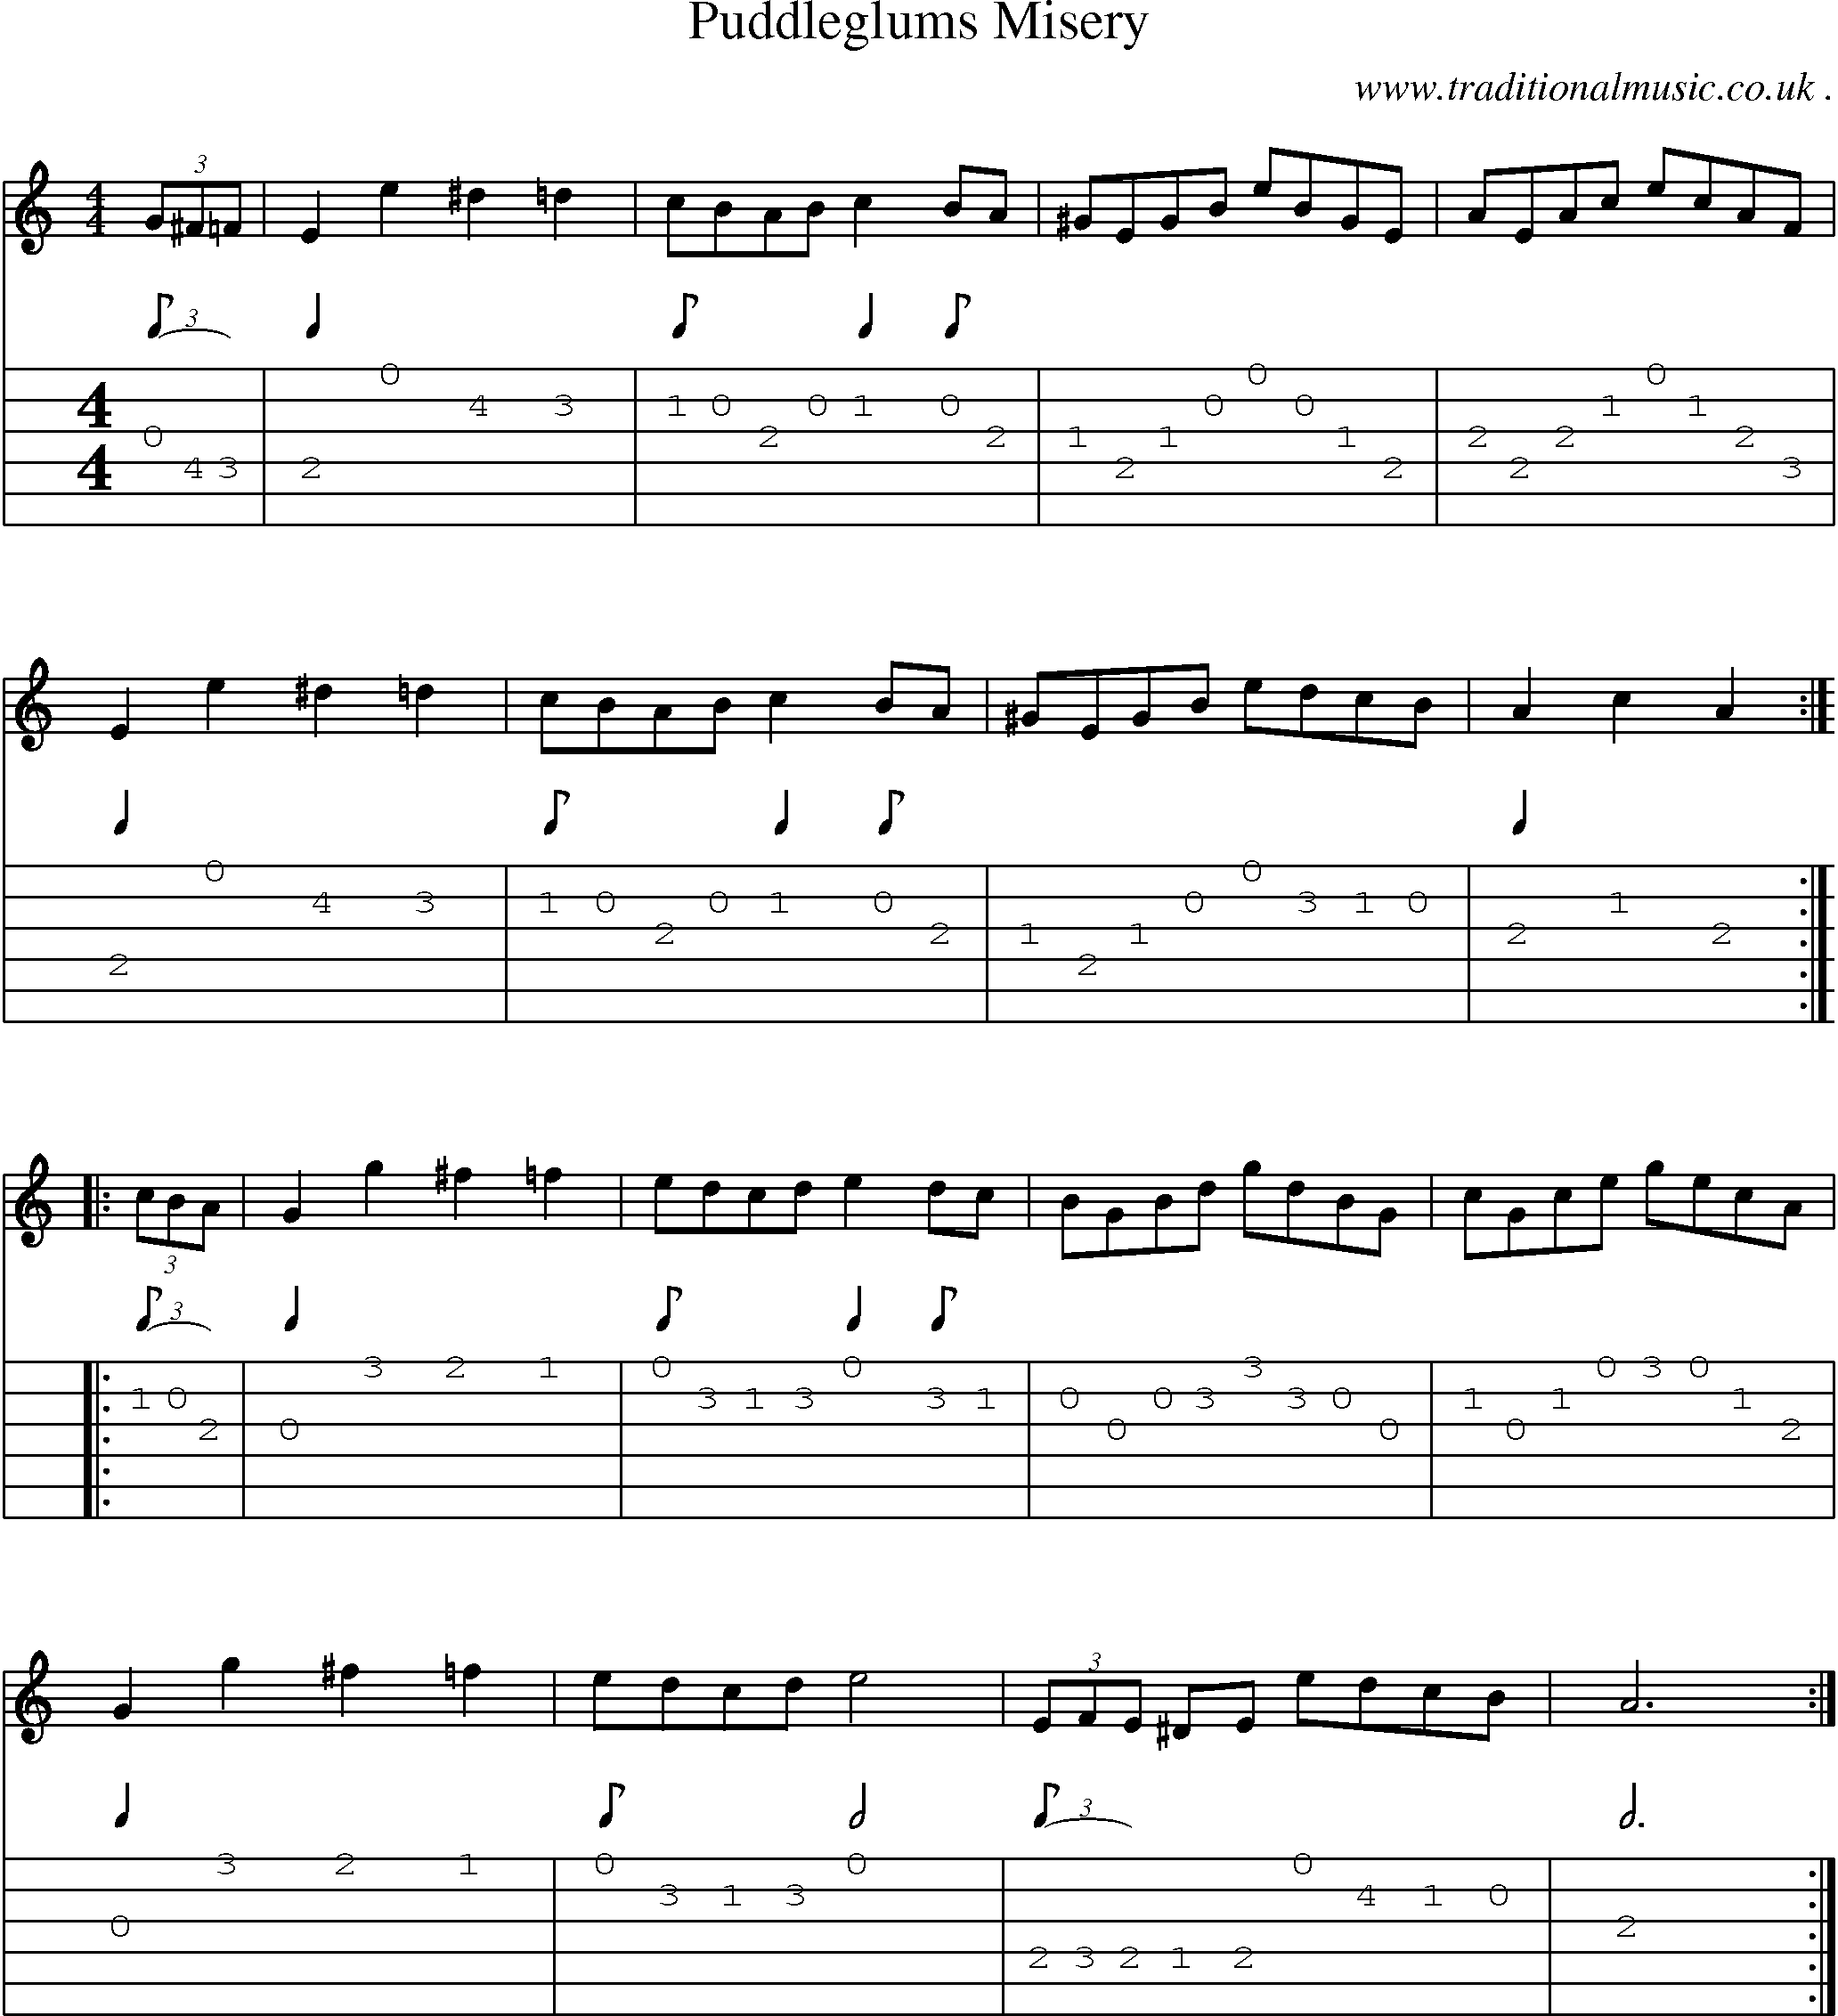 Sheet-Music and Guitar Tabs for Puddleglums Misery